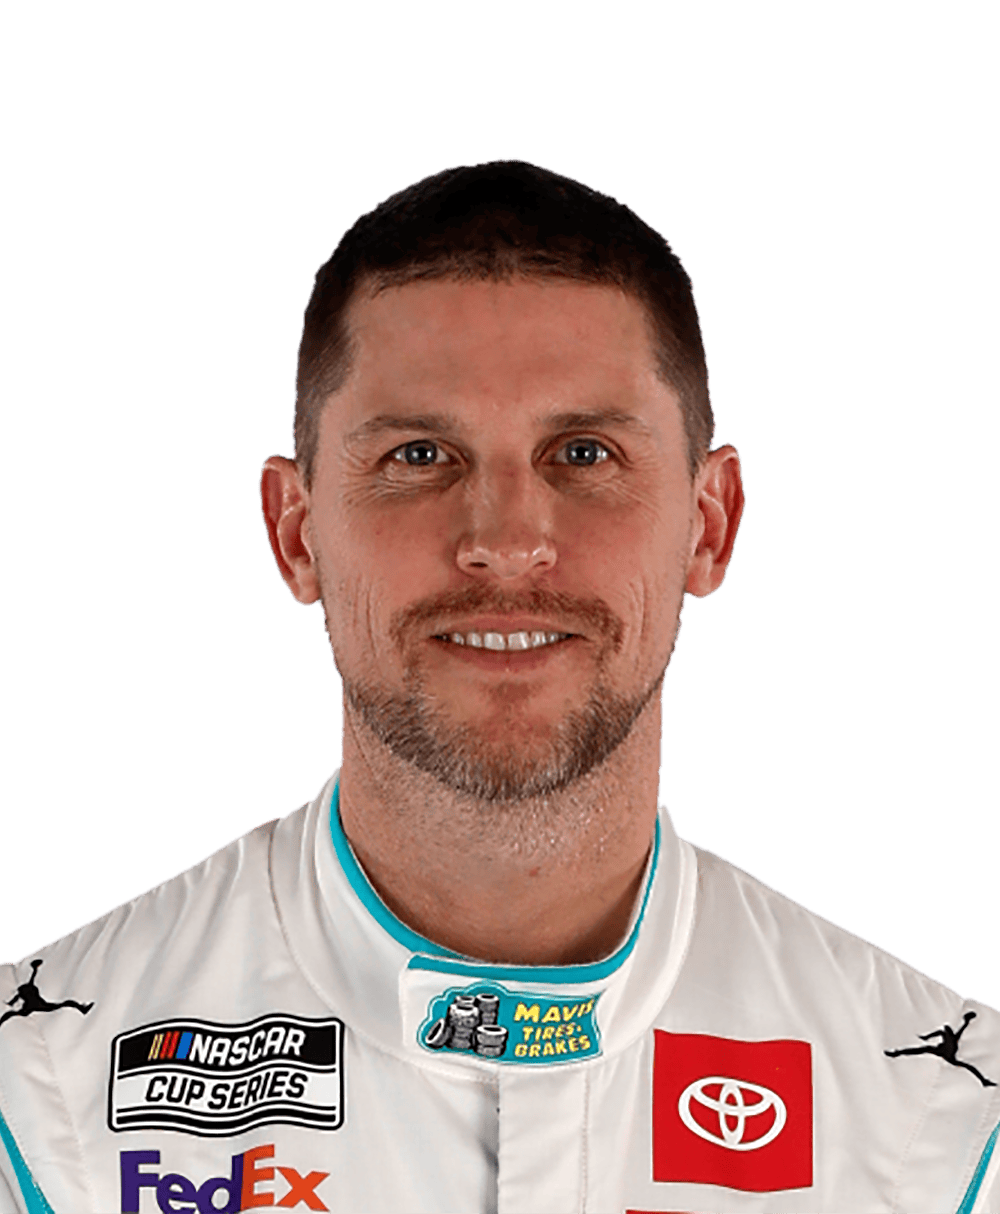 Denny Hamlin shares his thoughts on the NASCAR playoff system